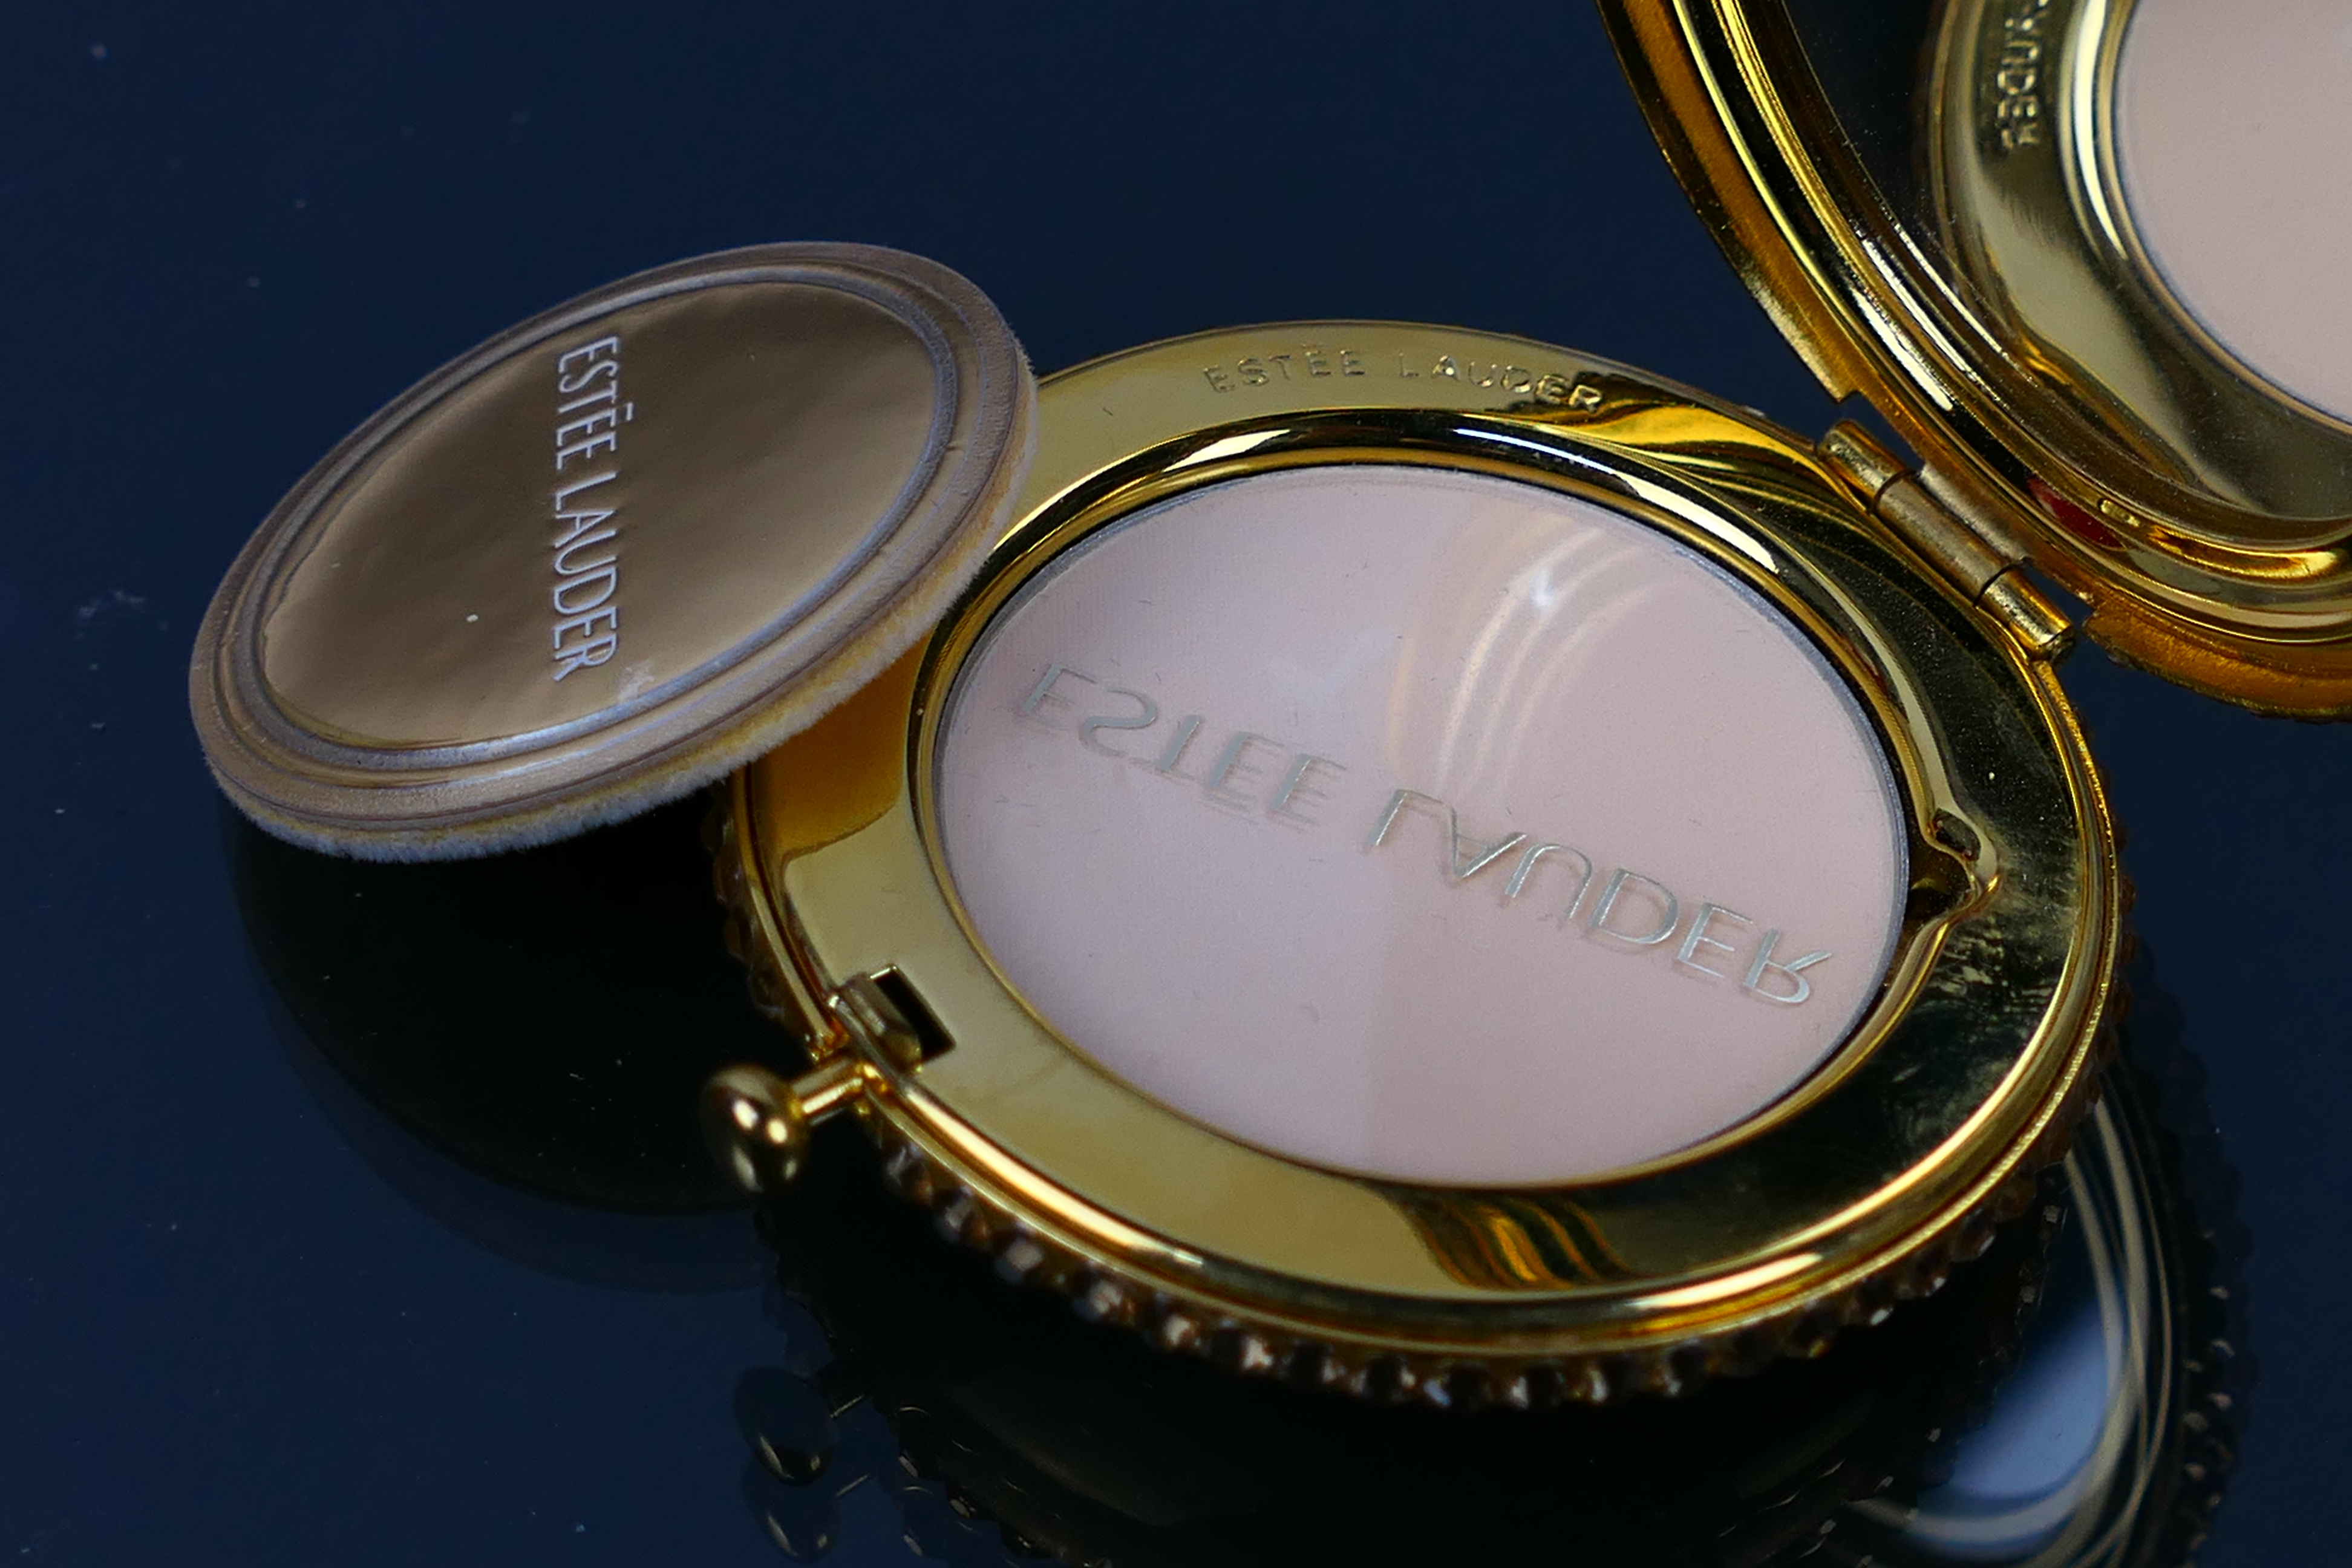 Estee Lauder - 2 x boxed gilt metal Estee Lauder powder compacts - Lot includes a Bamboo Weave - Image 9 of 10